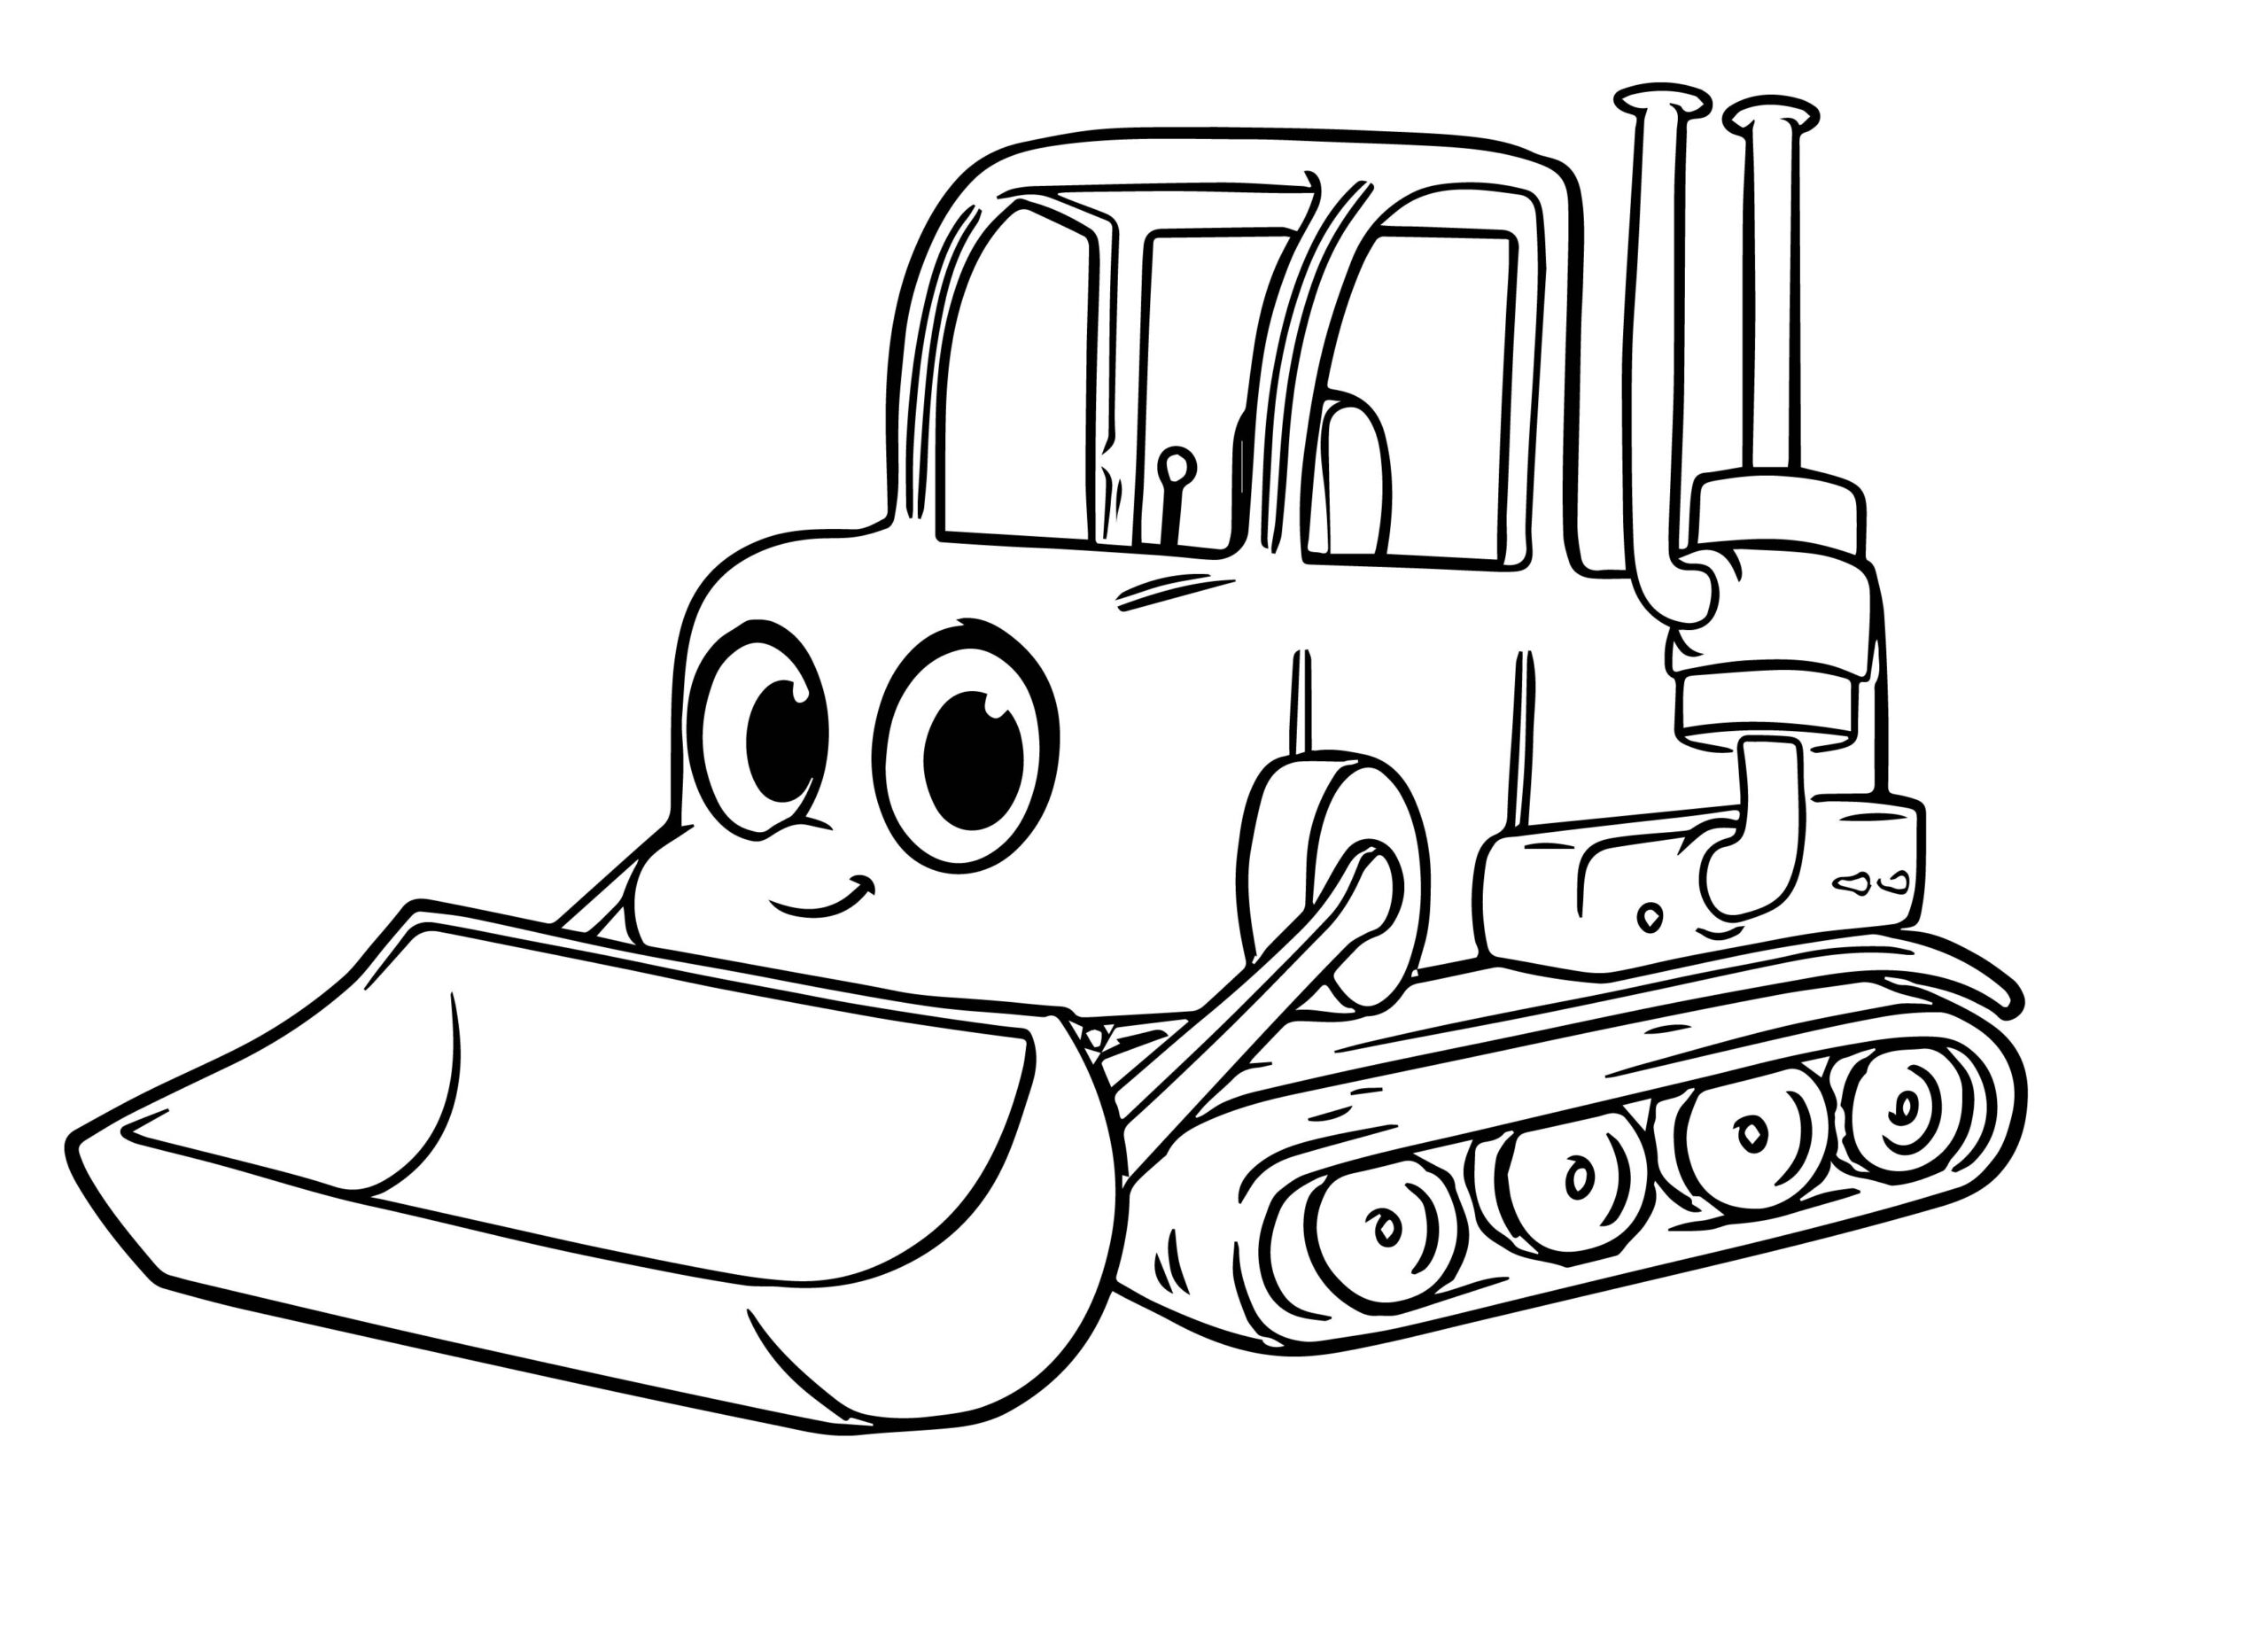 Happy Bulldozer coloring book to print and online